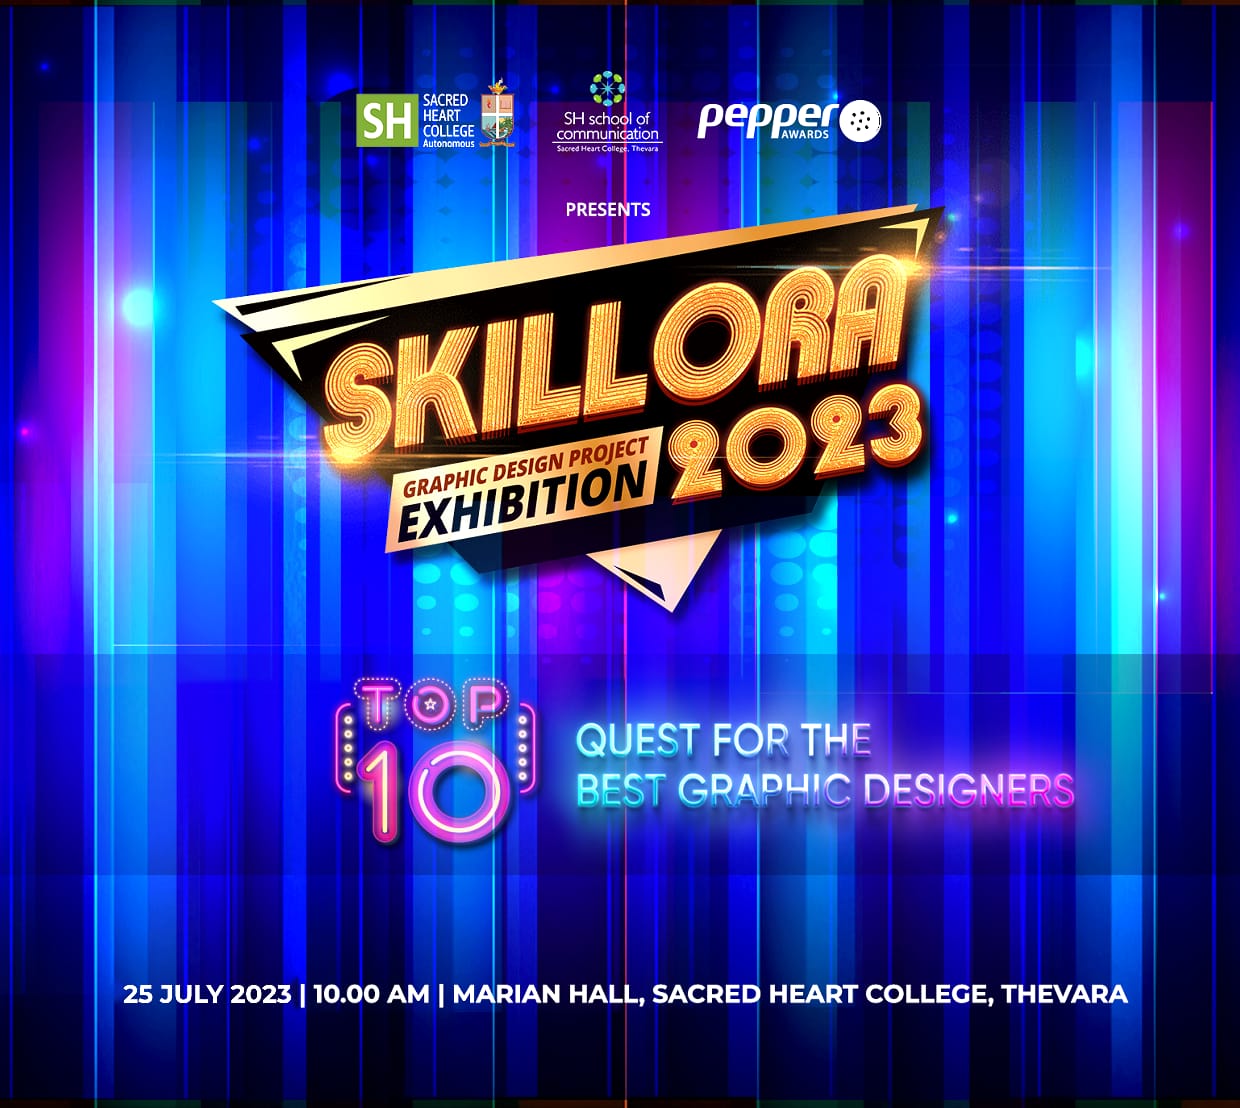 SKILLORA 2023 – THE QUEST FOR THE BEST GRAPHIC DESIGNERS